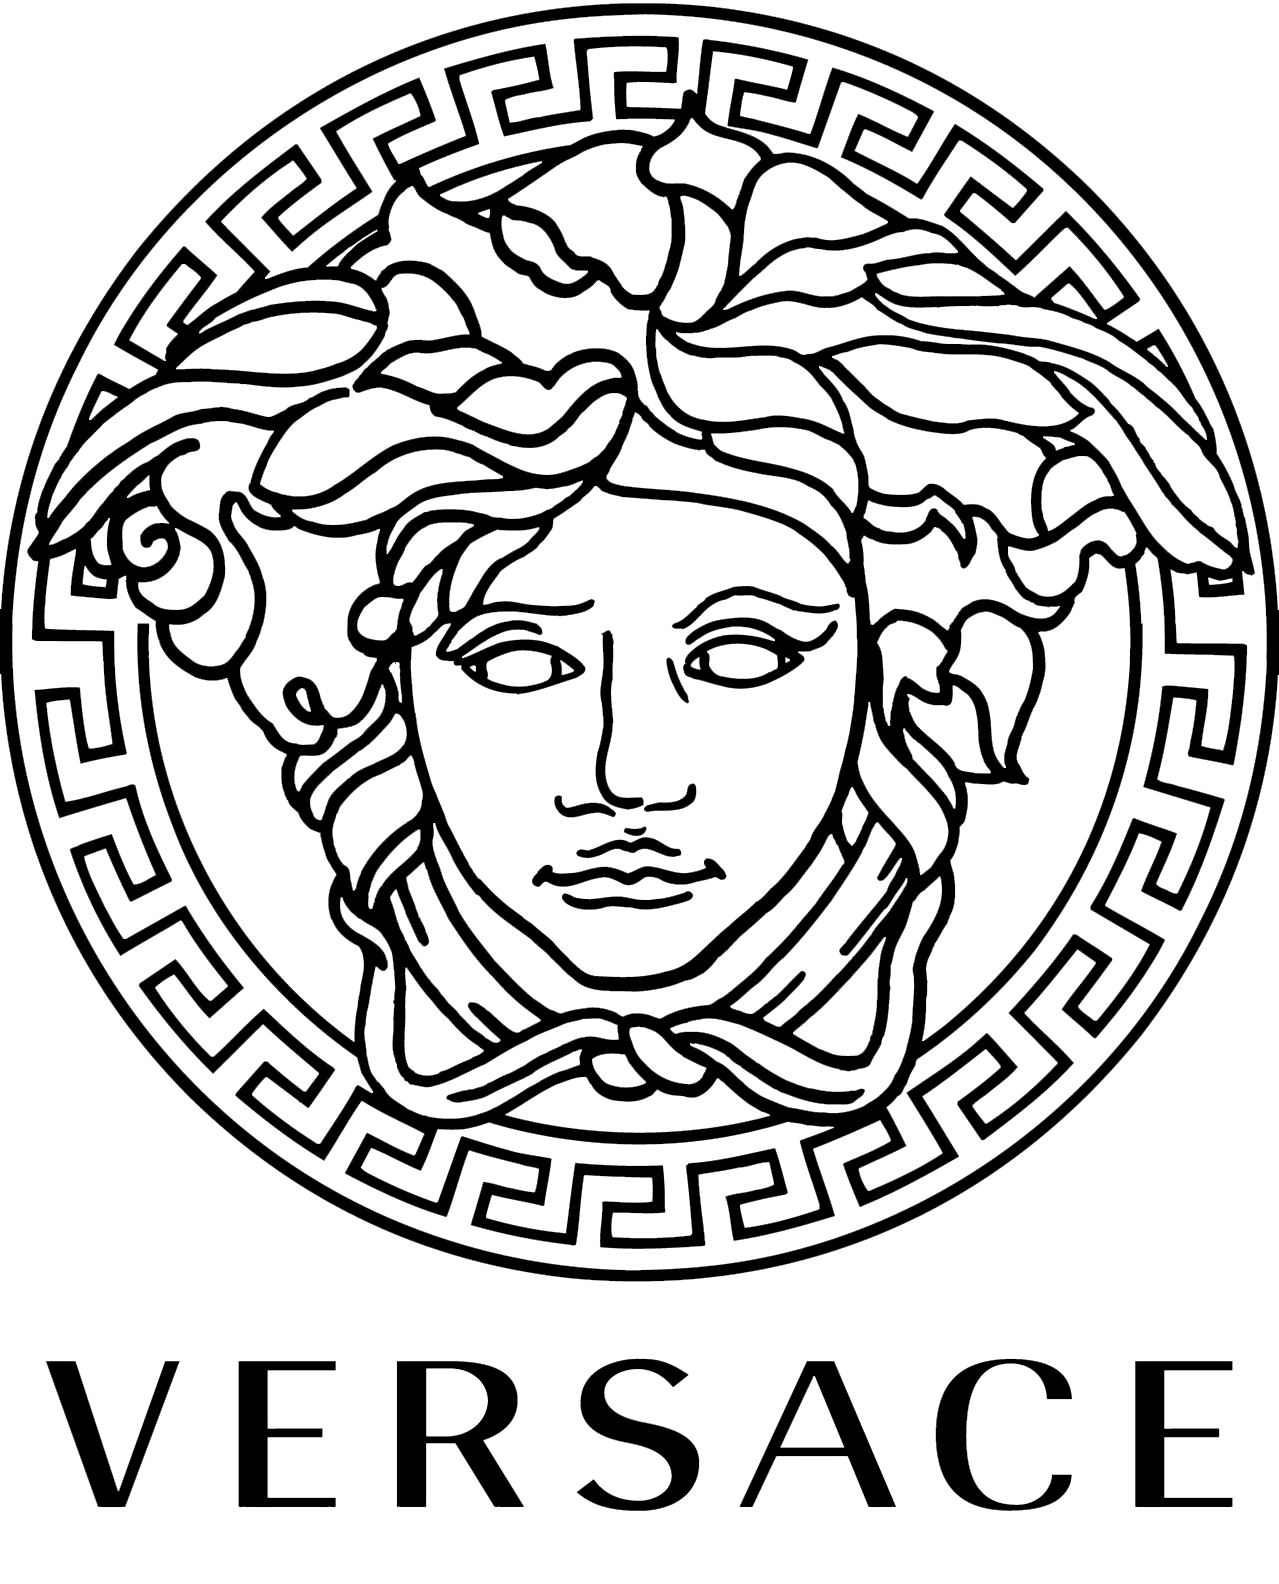 Gianni Versace Wallpapers - Wallpaper Cave